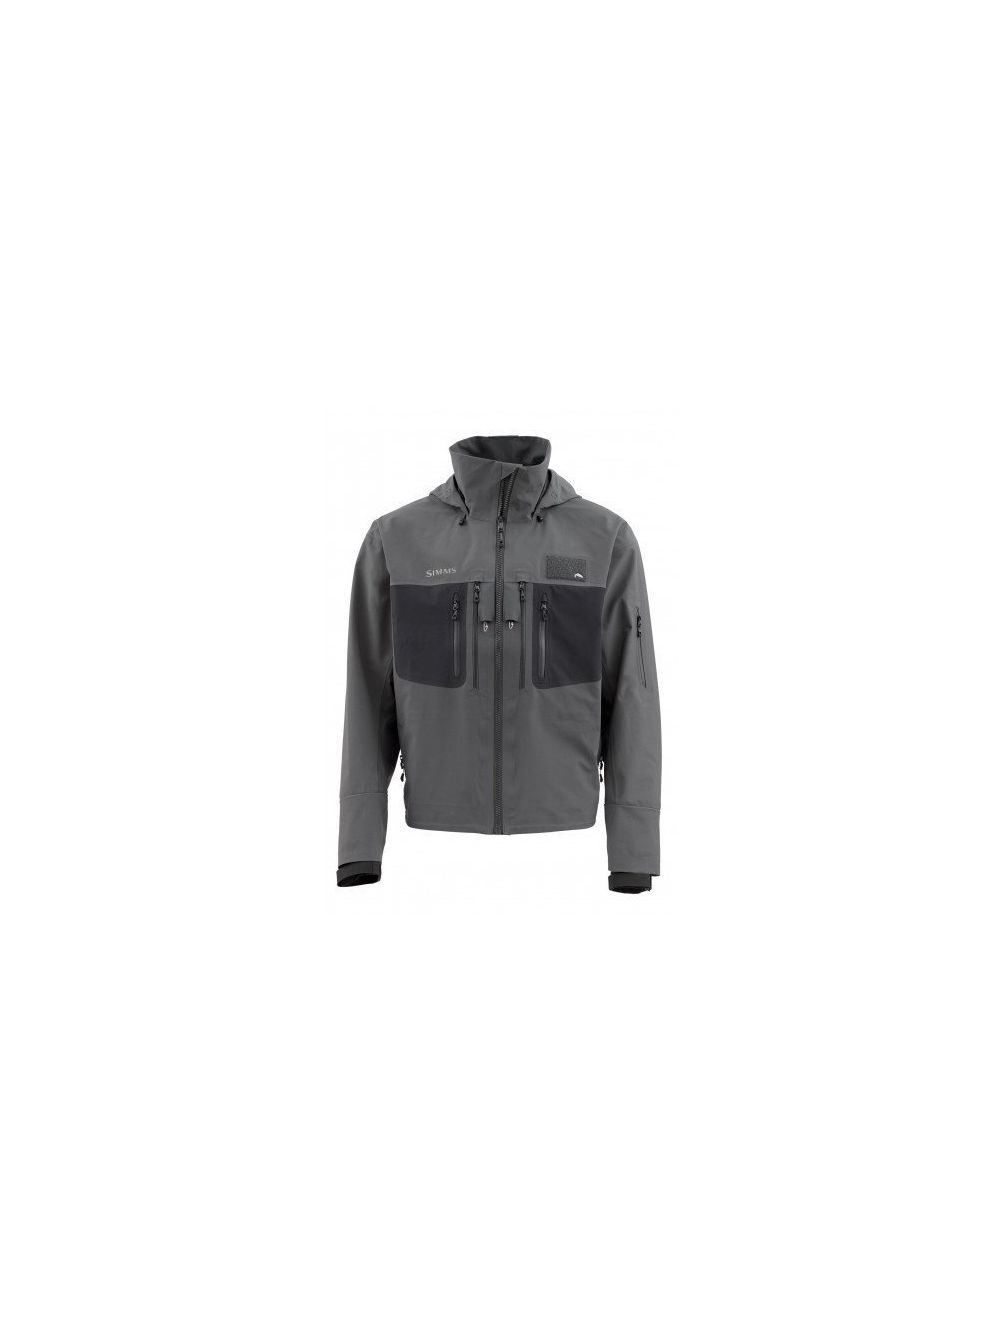 G3 Guide Tactical Jacket TheFlyStop